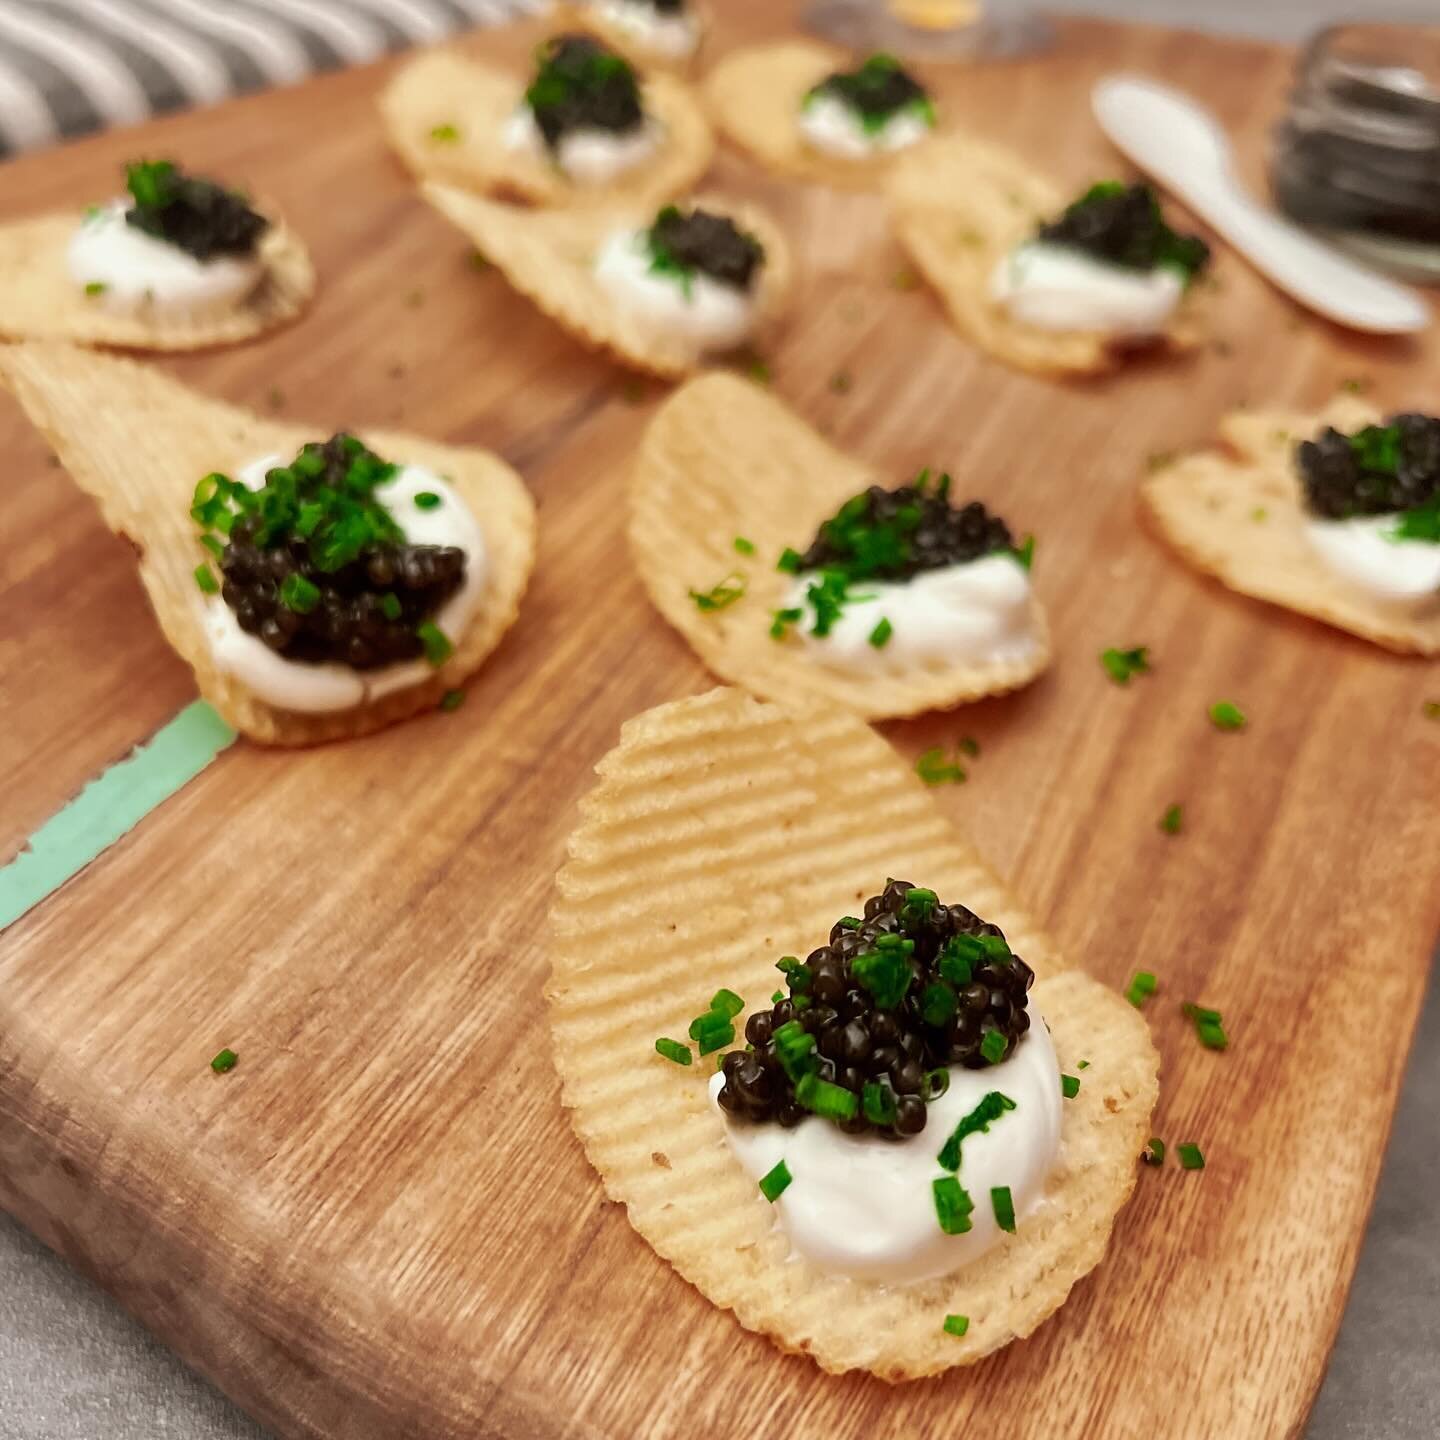 Royal Osetra Caviar
Potato Chips with Cr&egrave;me Fra&icirc;che &amp; Chives 

Happy weekend! I felt like having an indulgent lunch. Yup, this is my lunch! A massive scoop of gorgeous Royal Osetra Caviar from the fine folks @allfreshseafood placed u